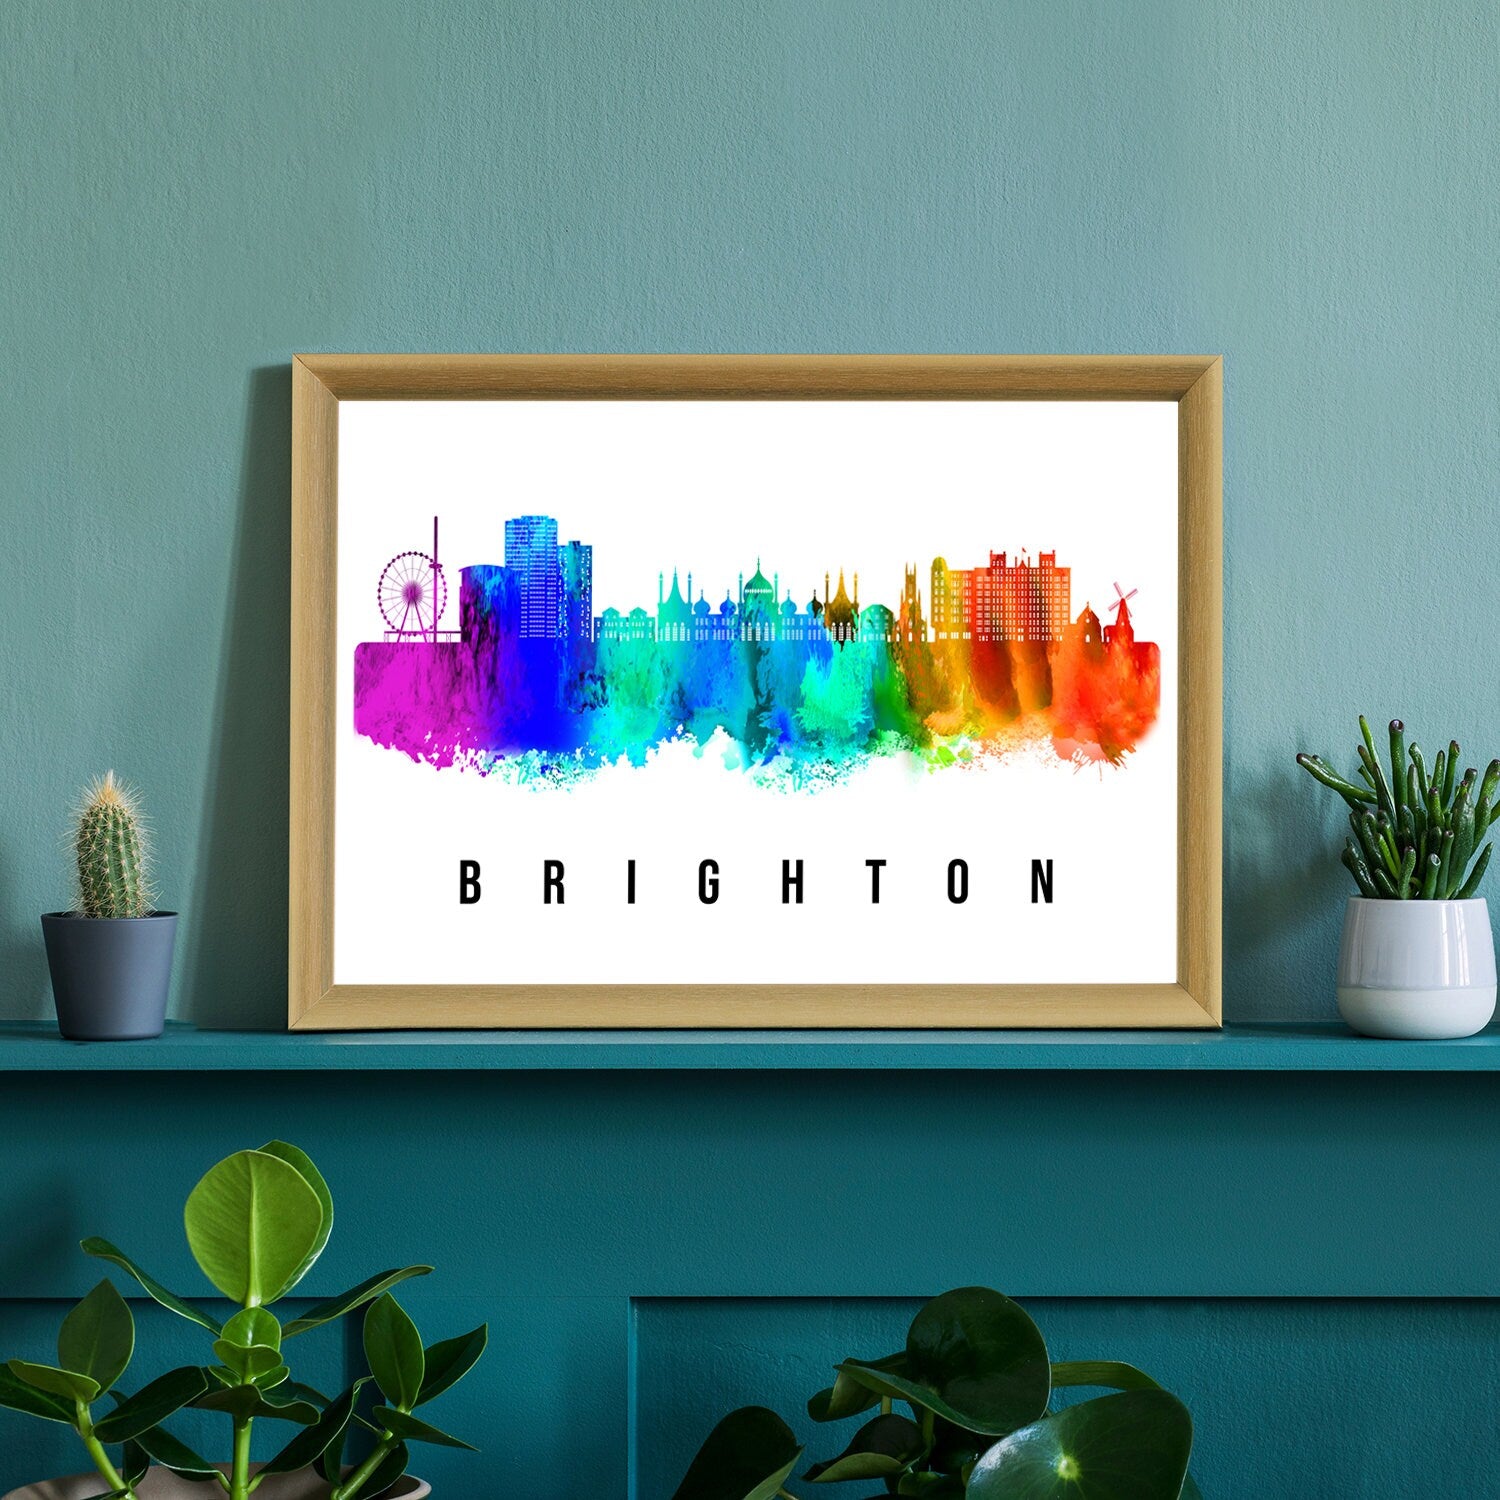 Brighton England Poster, Skyline poster cityscape poster, Landmark City Illustration poster, Home wall decoration, Office wall art